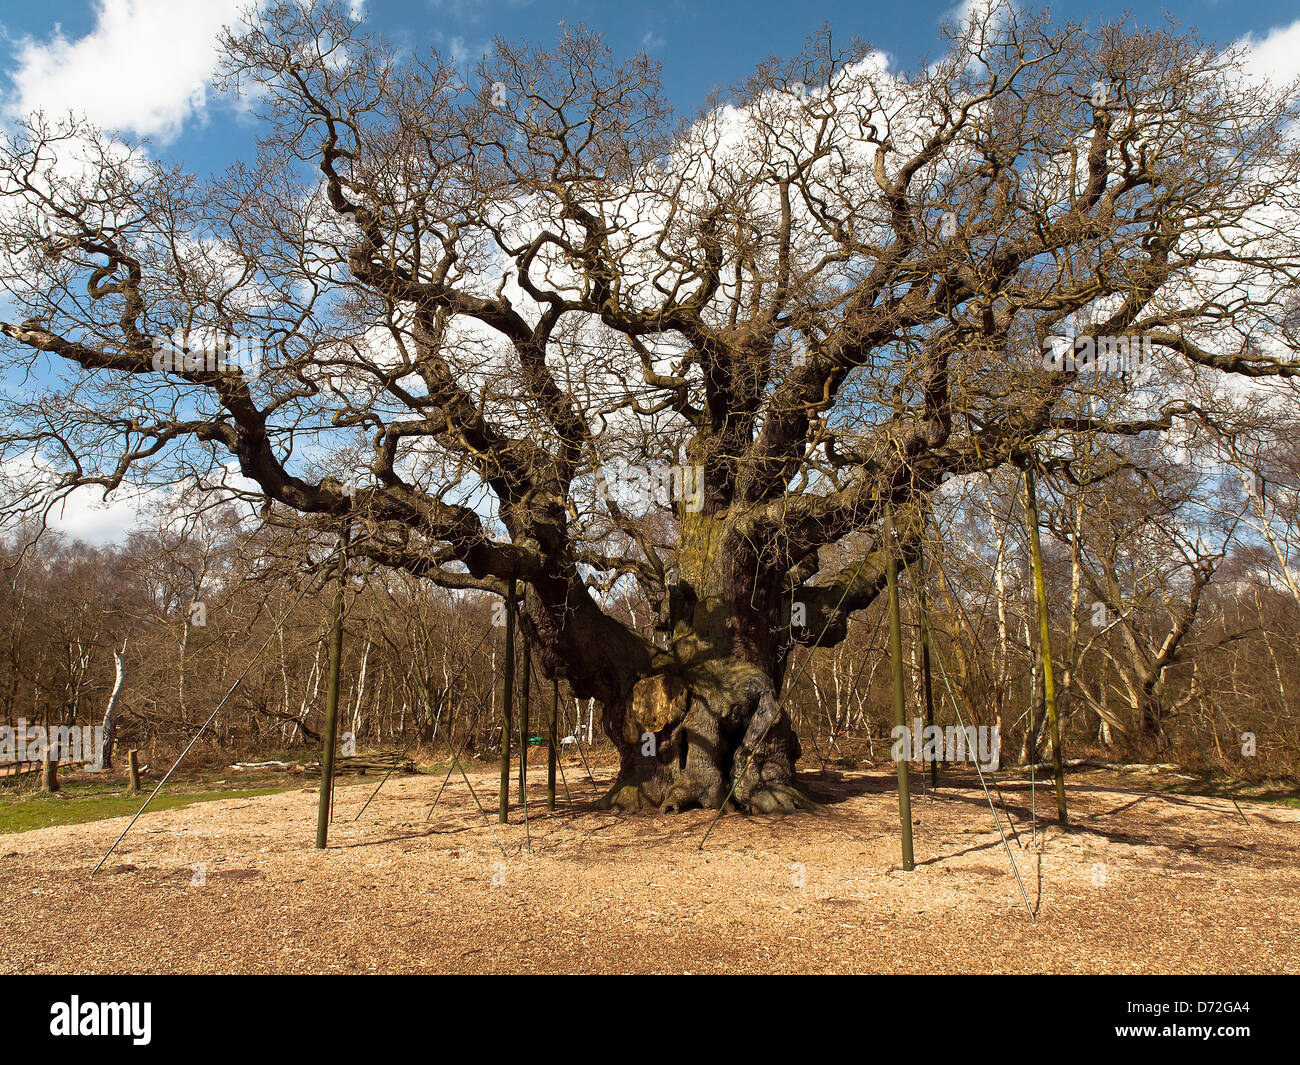 Major Oak. A massive English Oak tree located in Sherwood Forest. According to local folklore, it was Robin Hood's shelter. Stock Photo